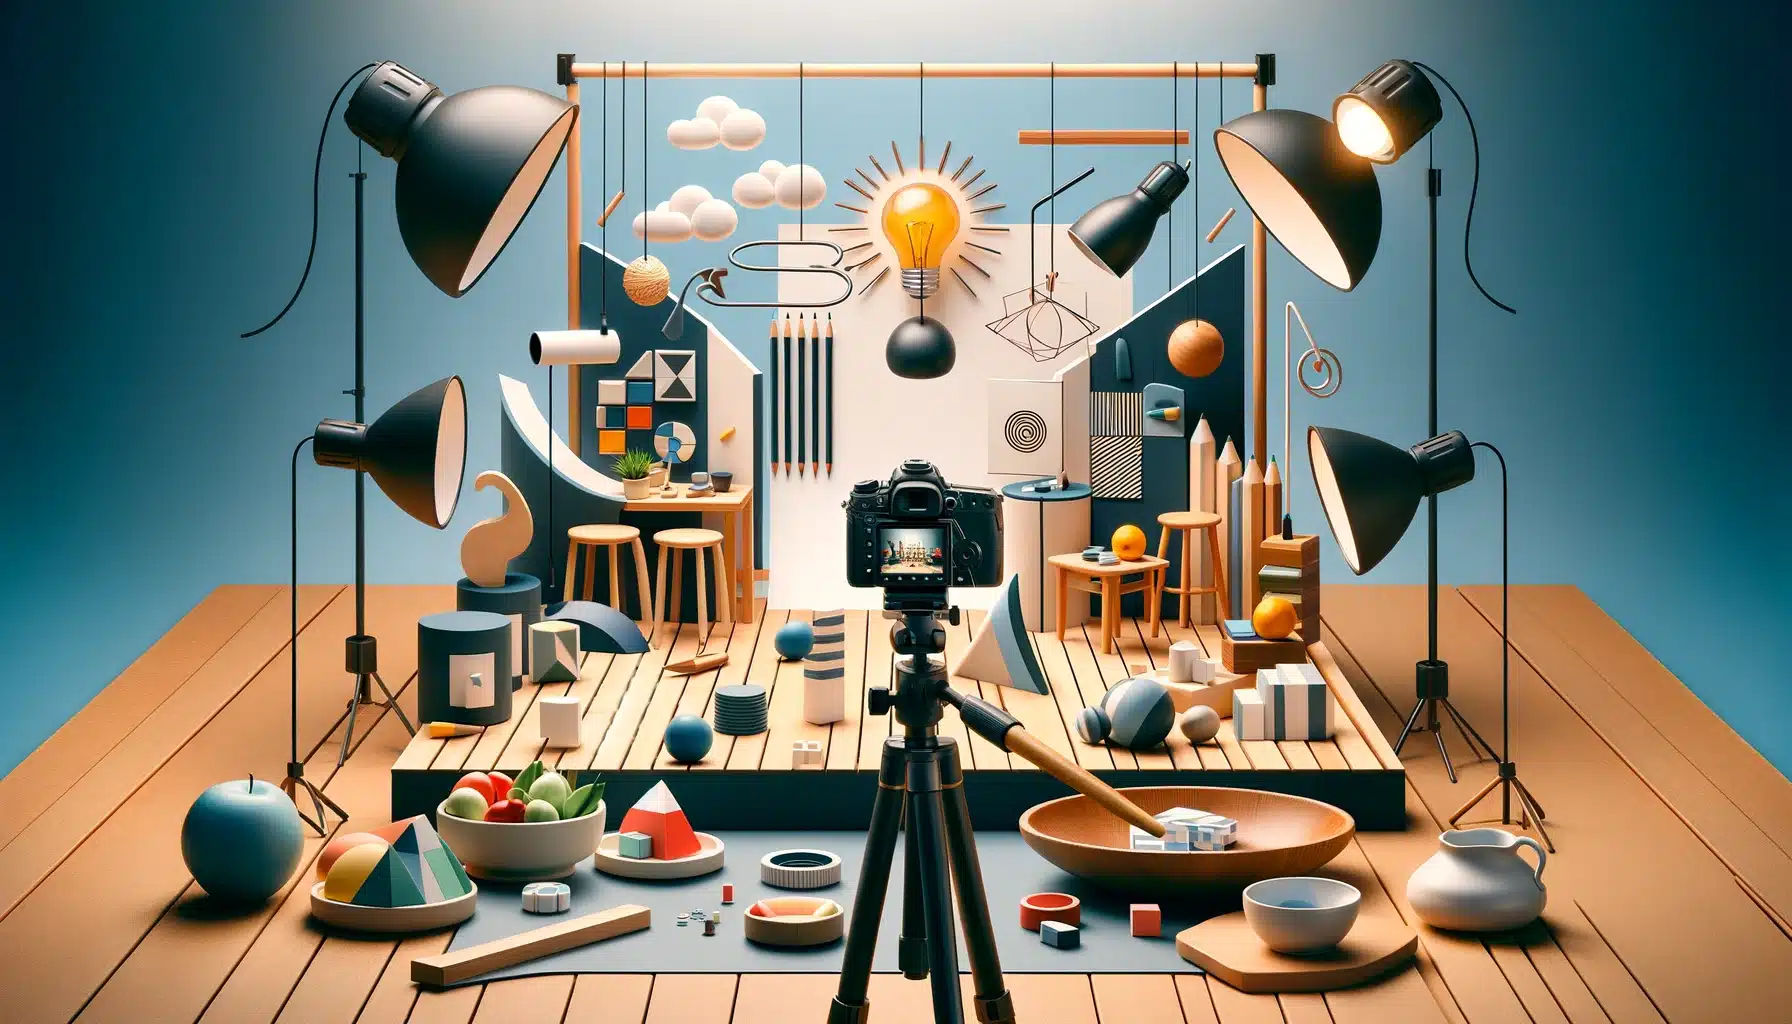 Camera on a tripod capturing a scene with balanced arrangement of objects, leading lines, and contrasting colors to illustrate composition in photography.